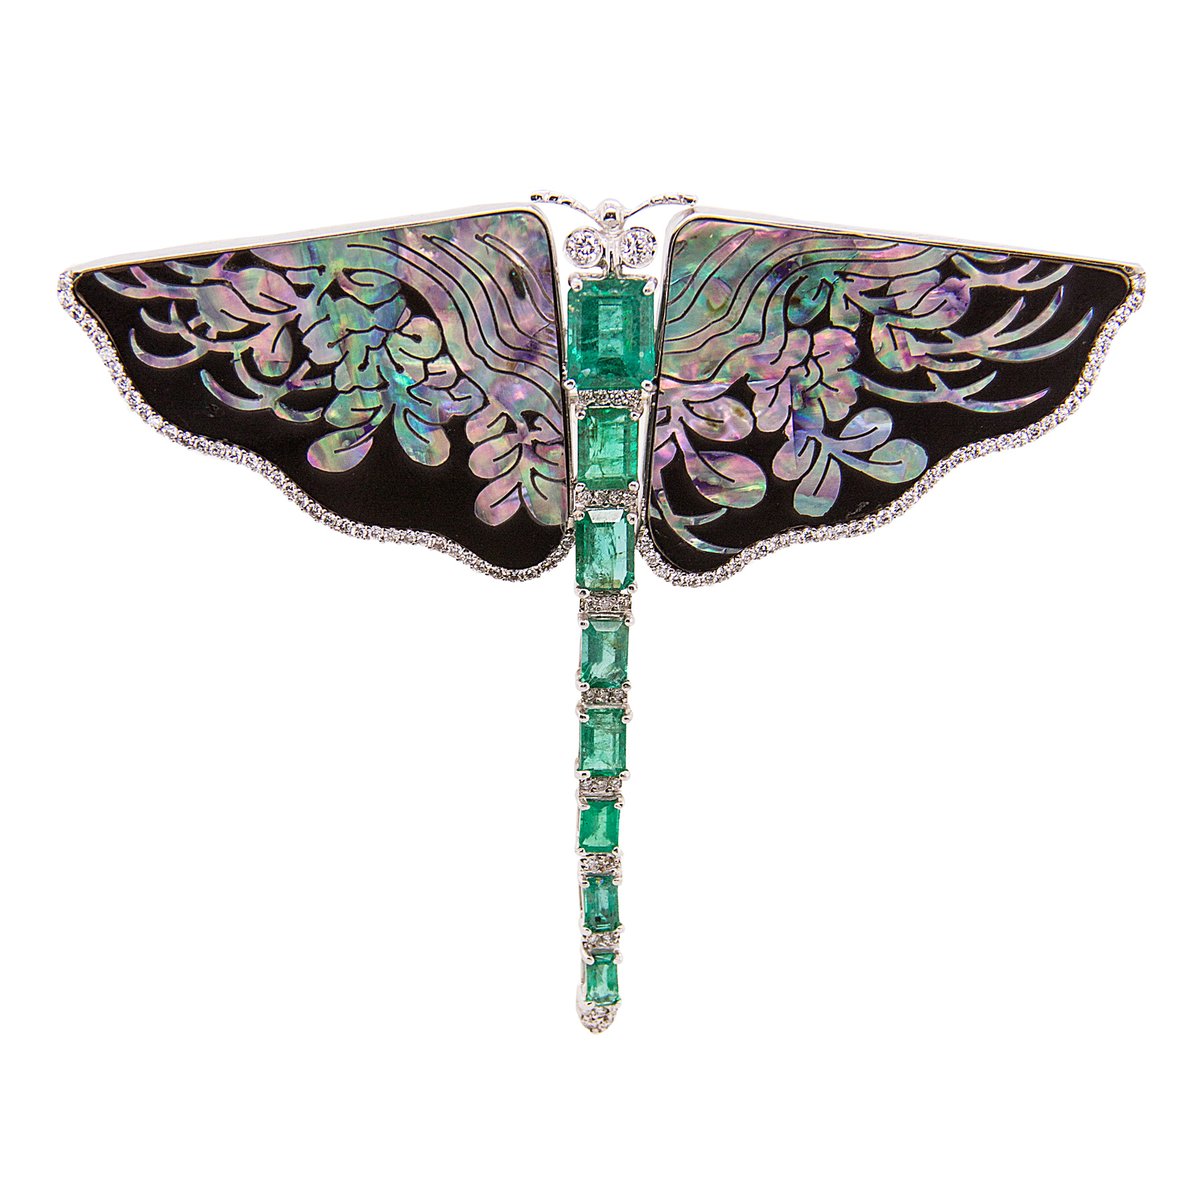 The Furmanovich brooch again, because it's stunning. The wings are traditional Asian lacquer work with inlaid abalone shell, with diamonds, and the body is emeralds.